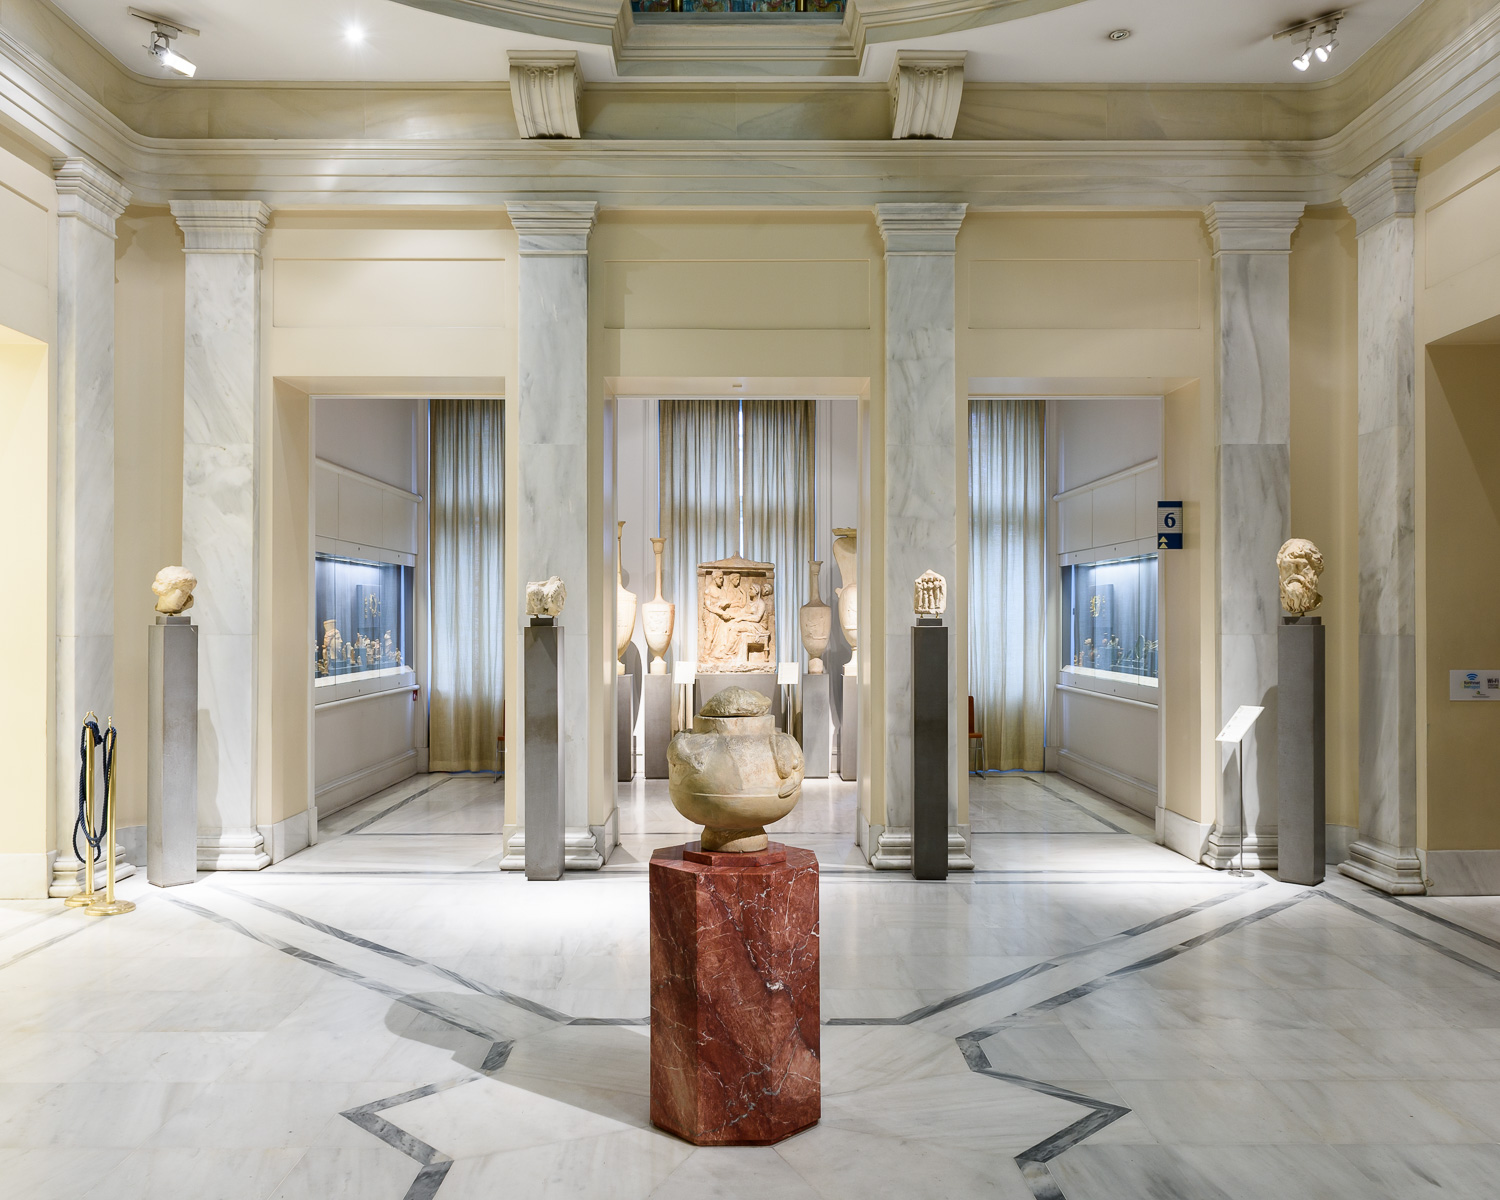  The Benaki Museum, founded in 1930. Includes Greek art from all periods. 